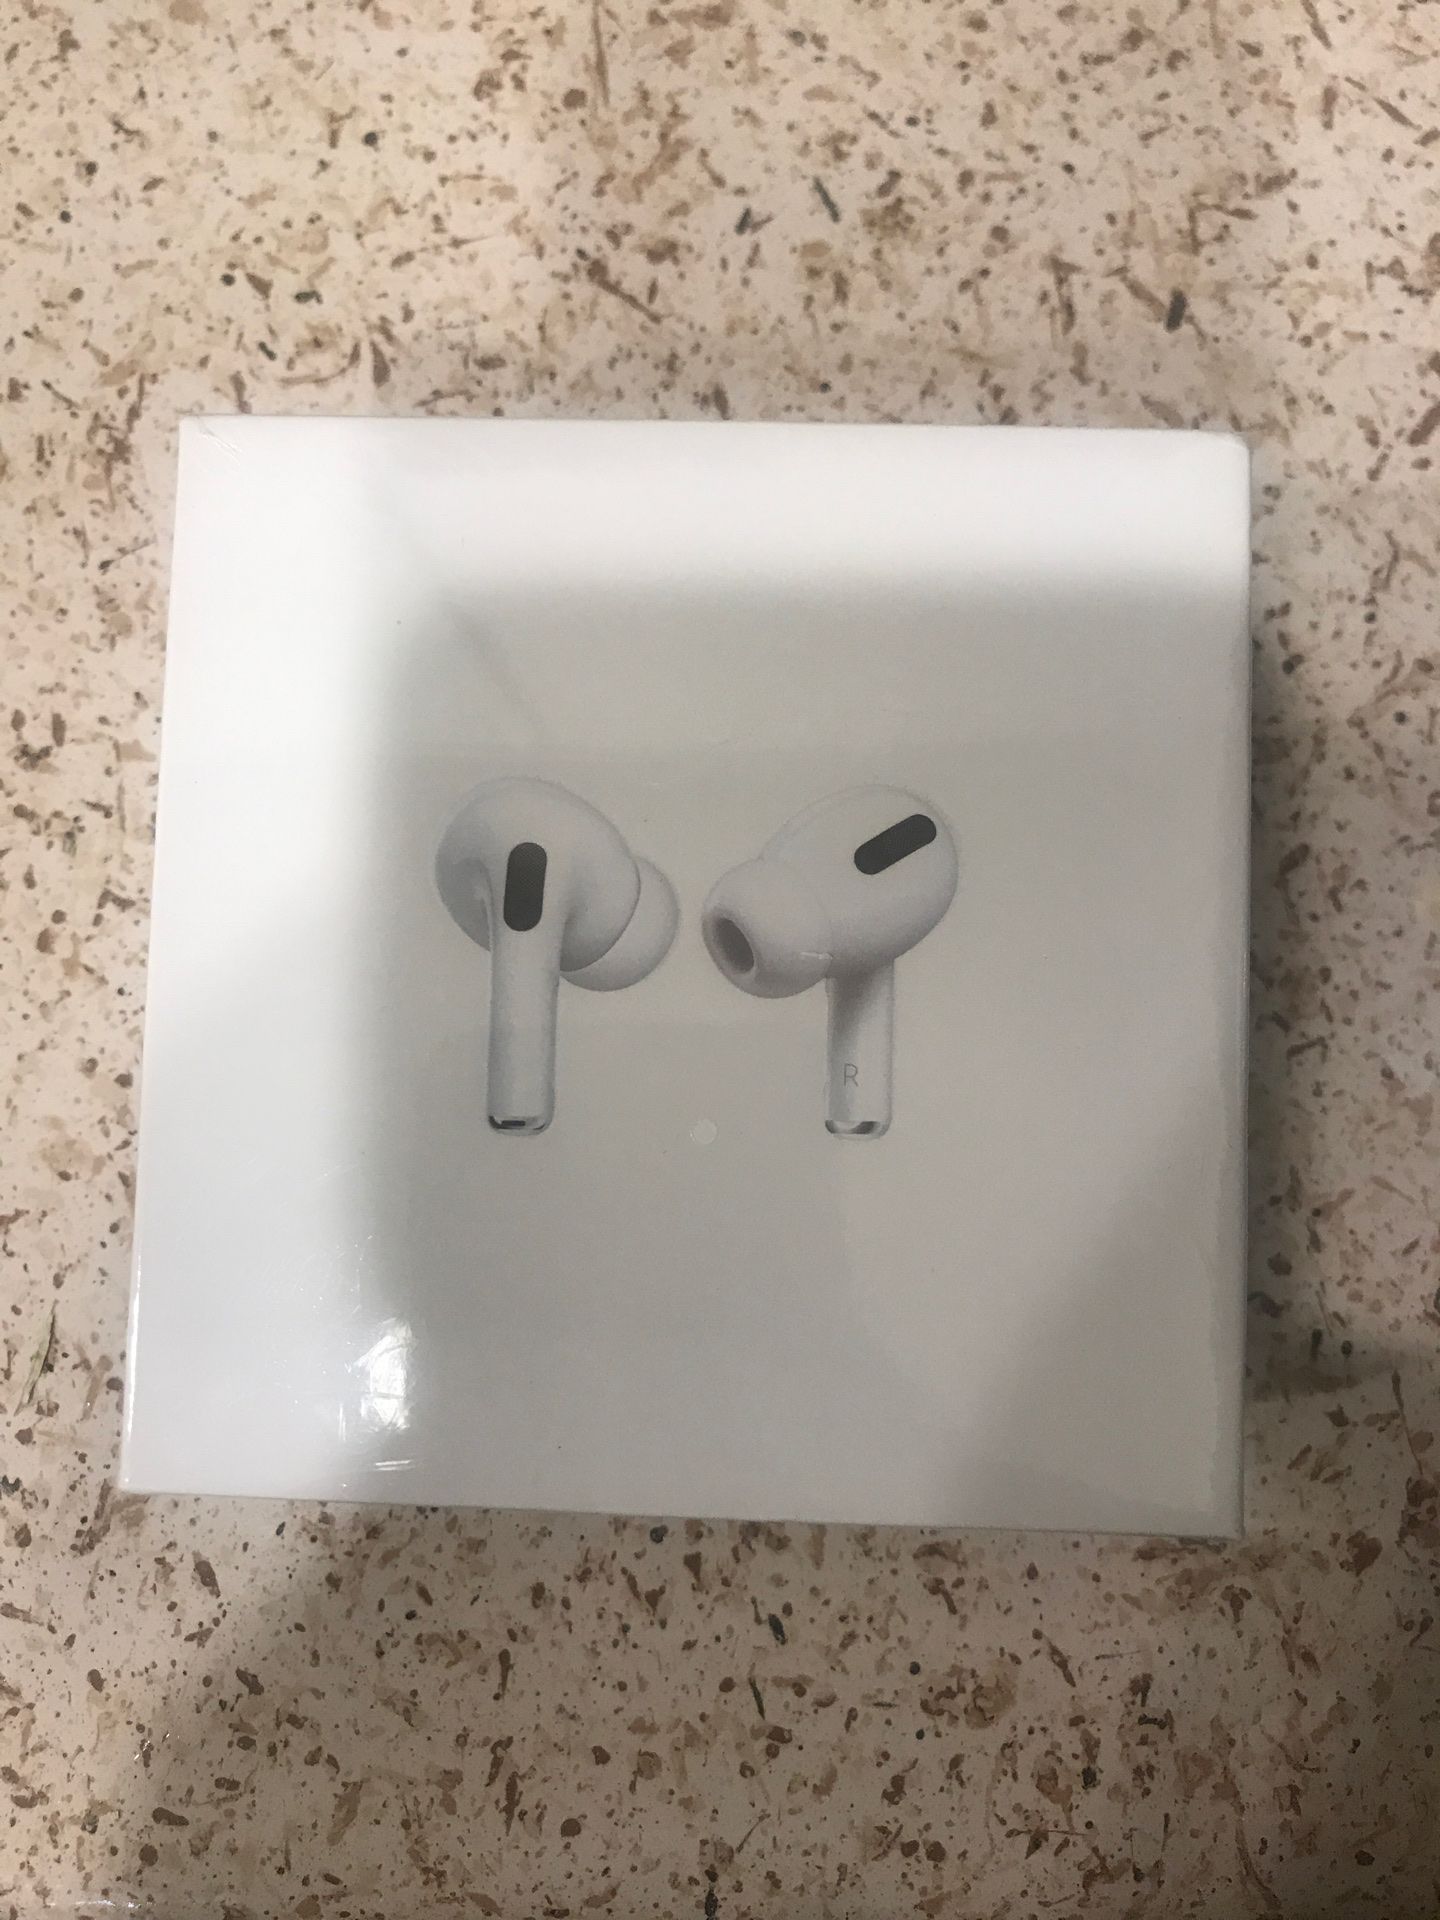 Airpods pro wireless charging case